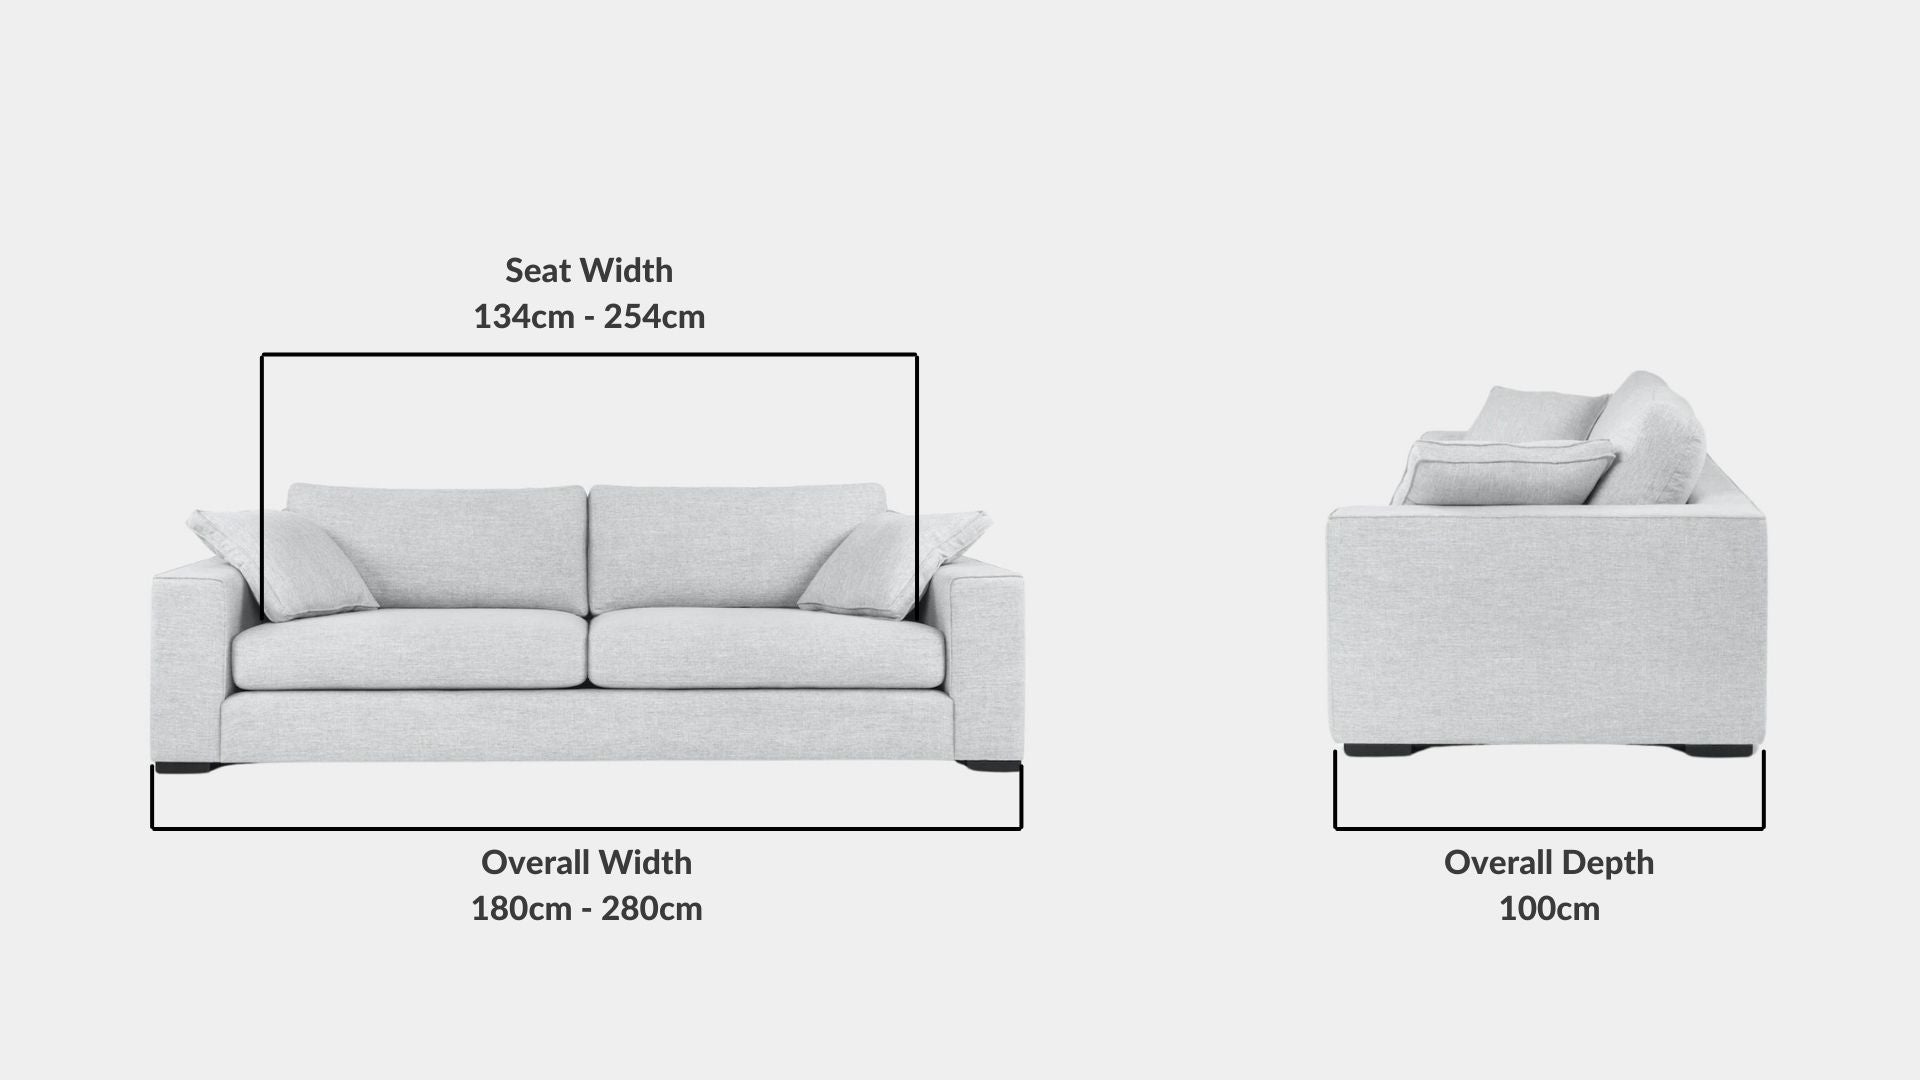 Details the key dimensions in terms of overall width, overall depth and seat width for Coastal Fabric Sofa